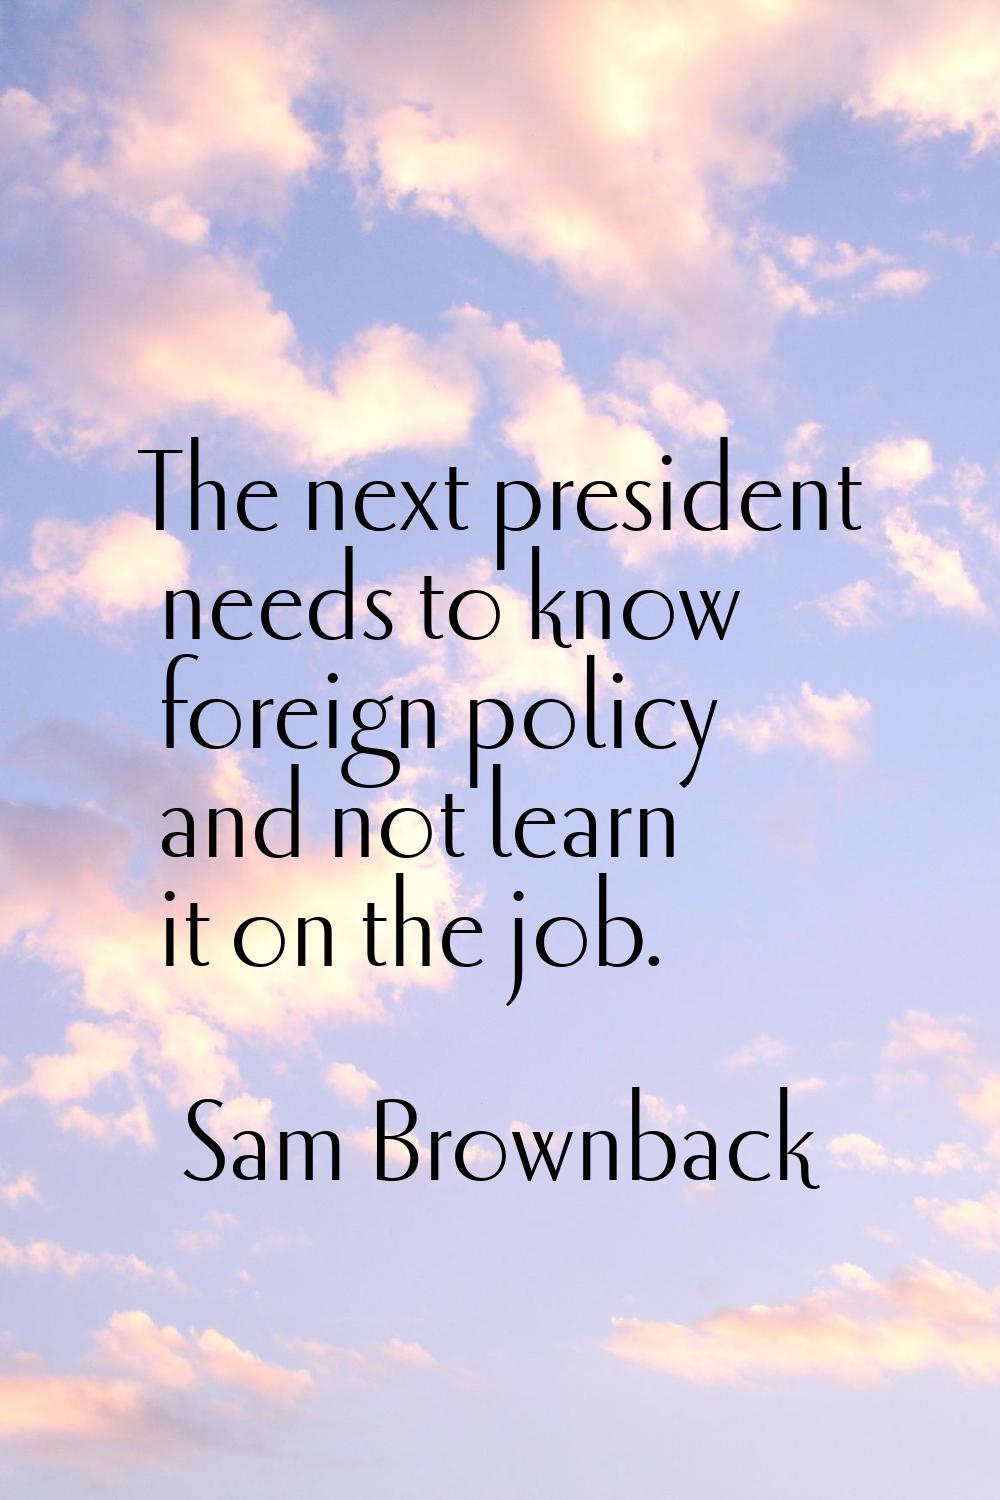 The next president needs to know foreign policy and not learn it on the job.